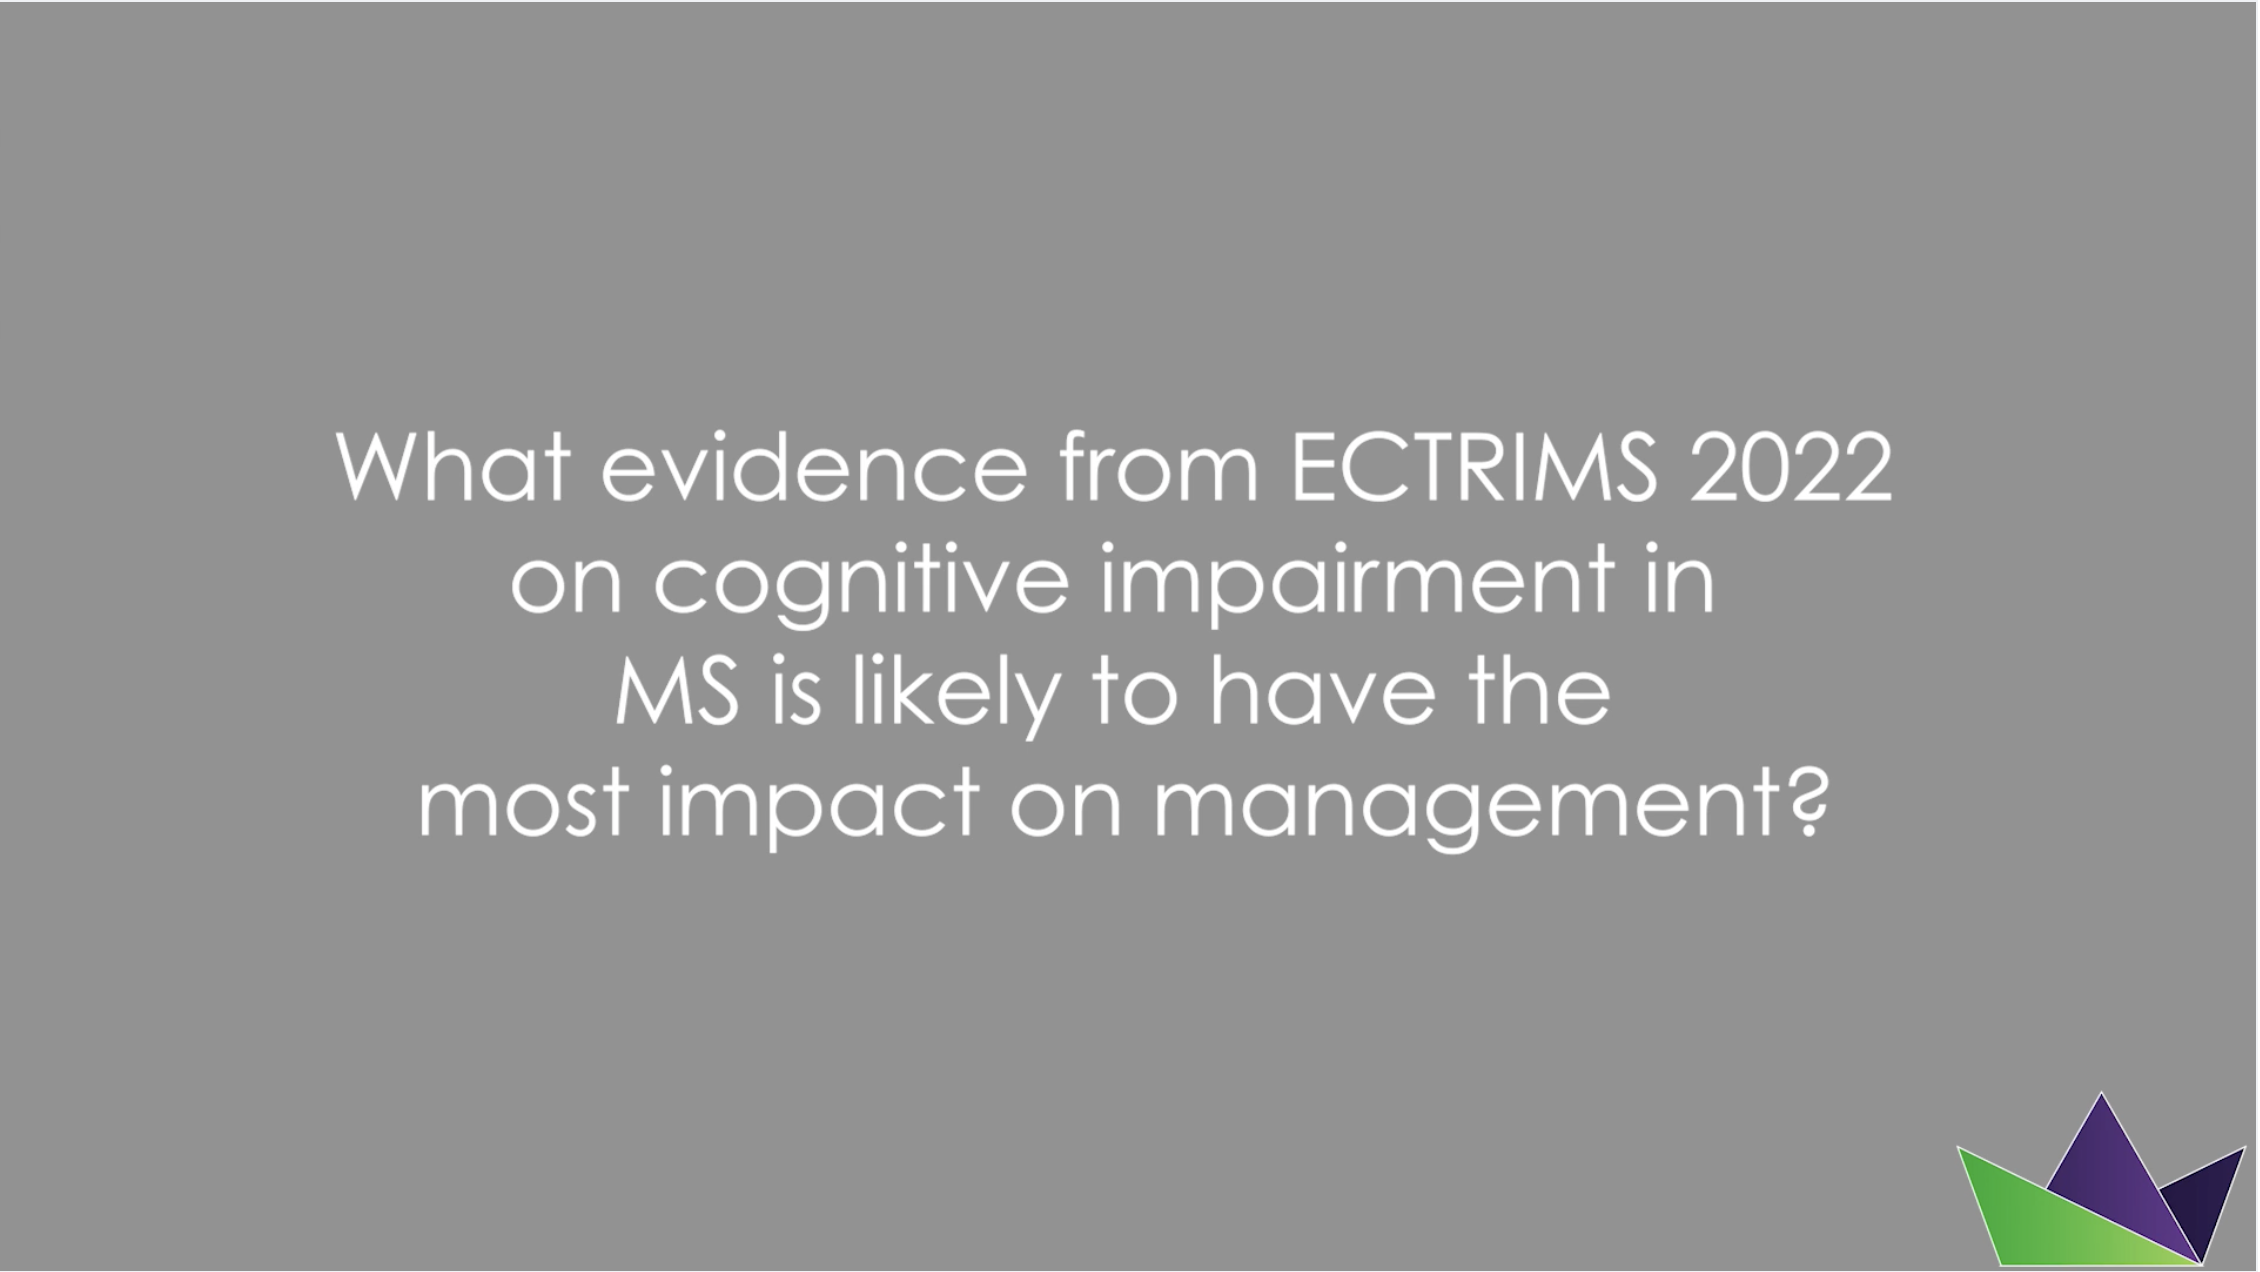 What evidence from ECTRIMS 2022 on cognitive impairment in MS is likely to have the most impact on management?